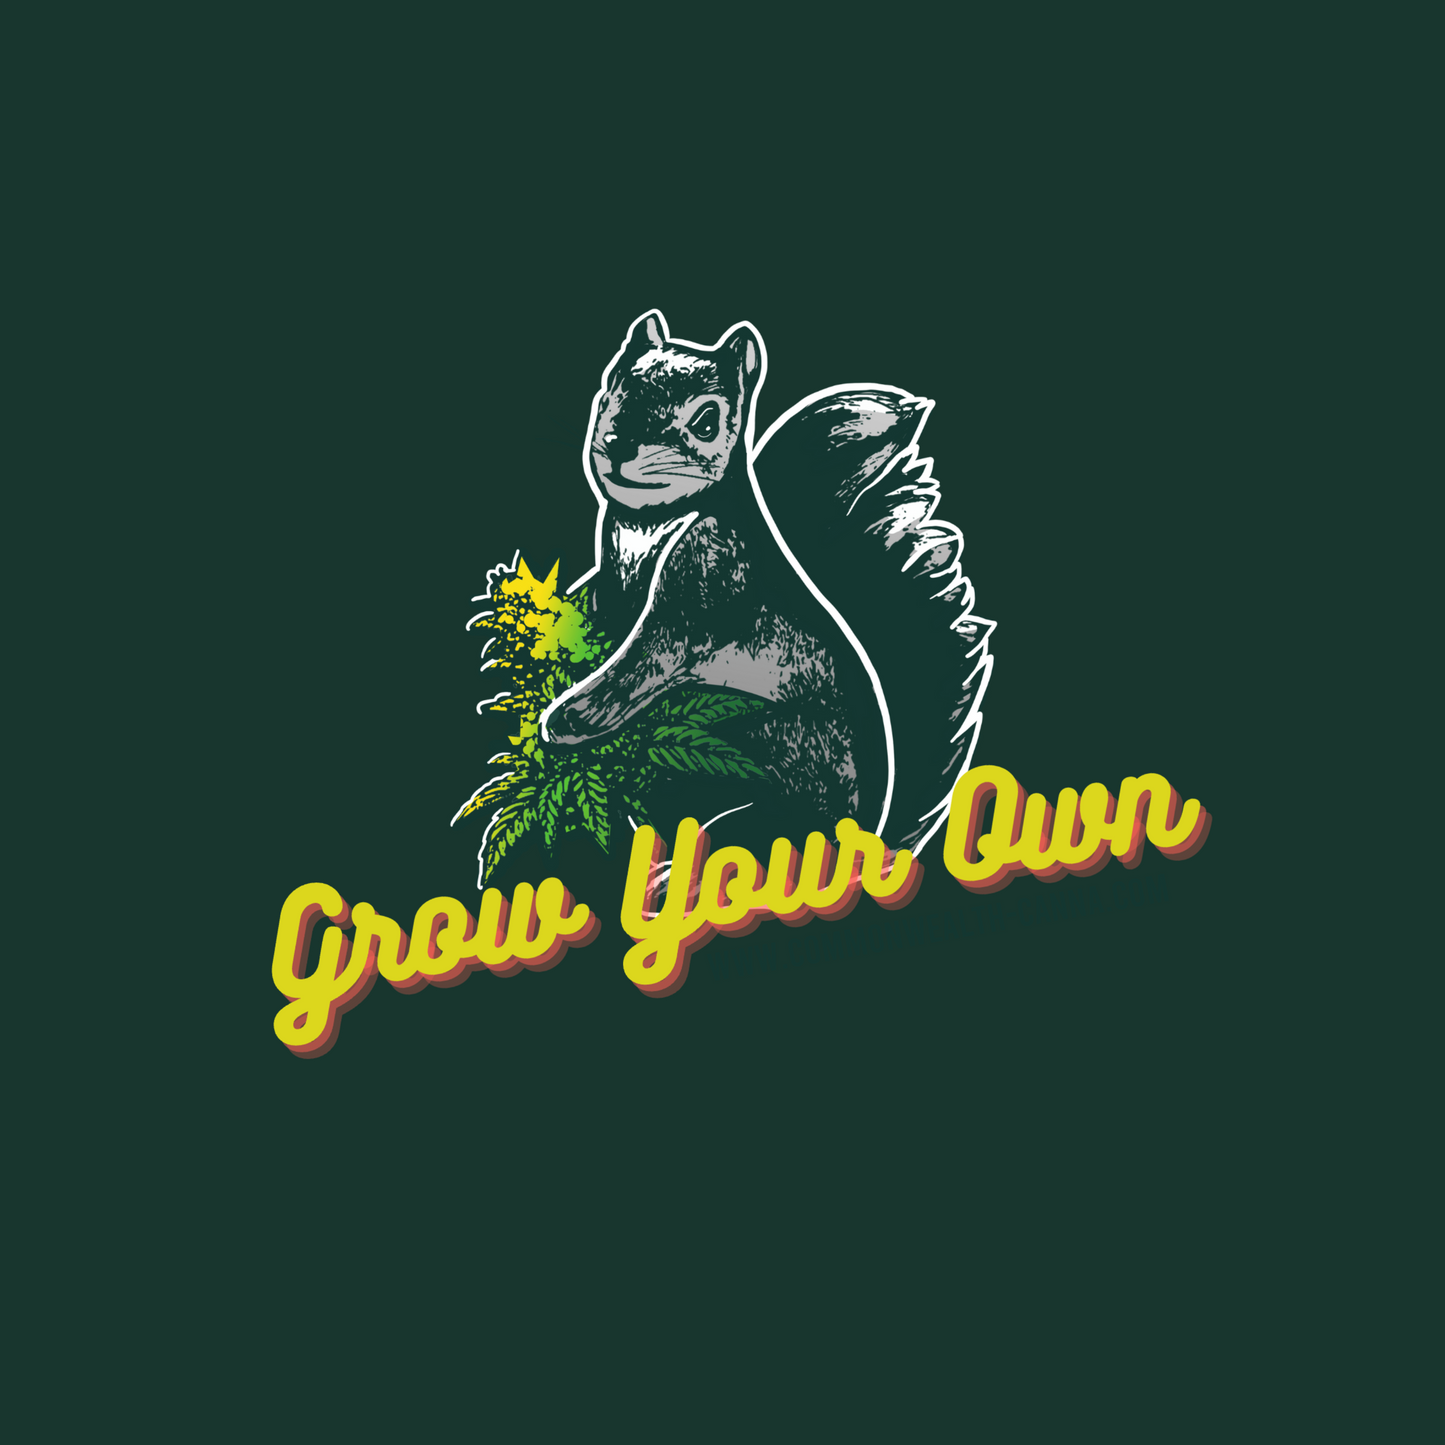 Grow Your Own Sticker